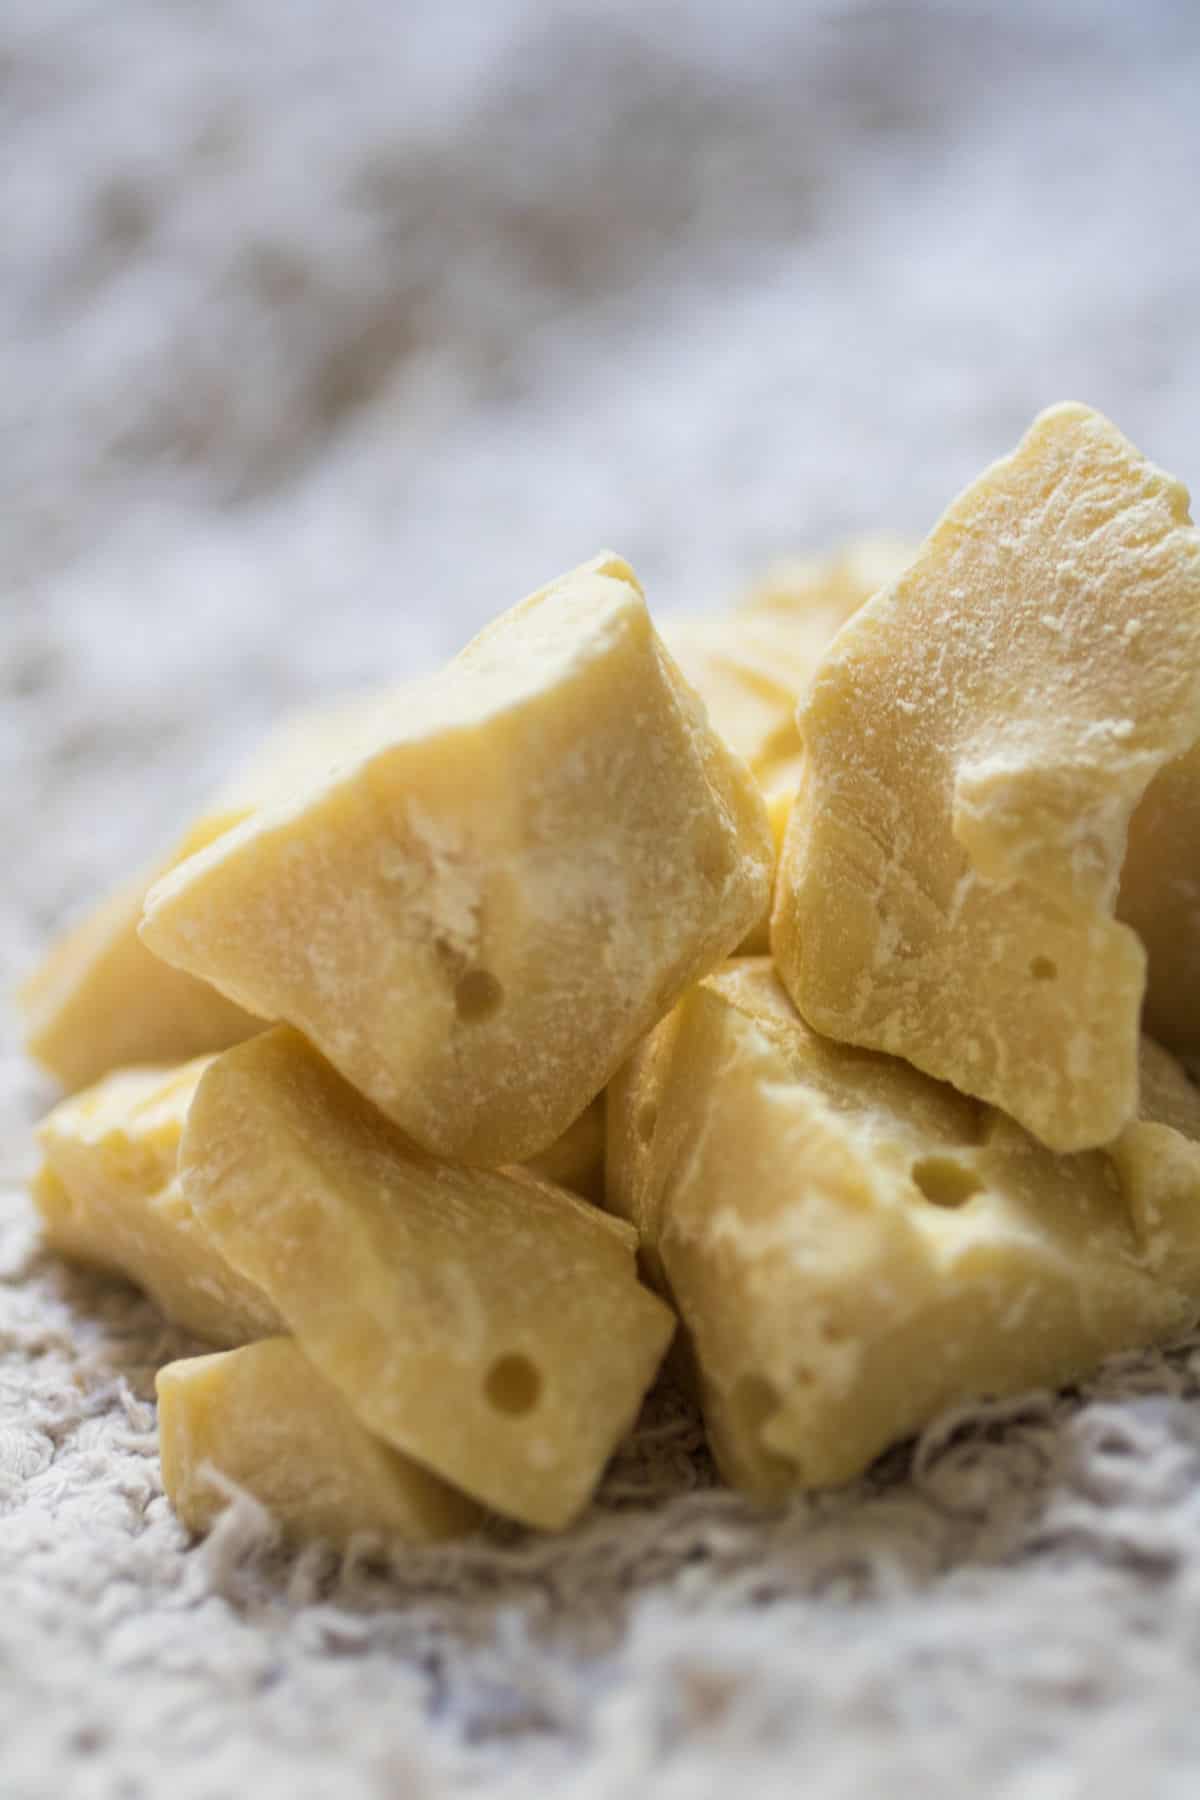 An up close picture of light yellow colored raw and hard chunks of cocoa butter on a light grey rug.